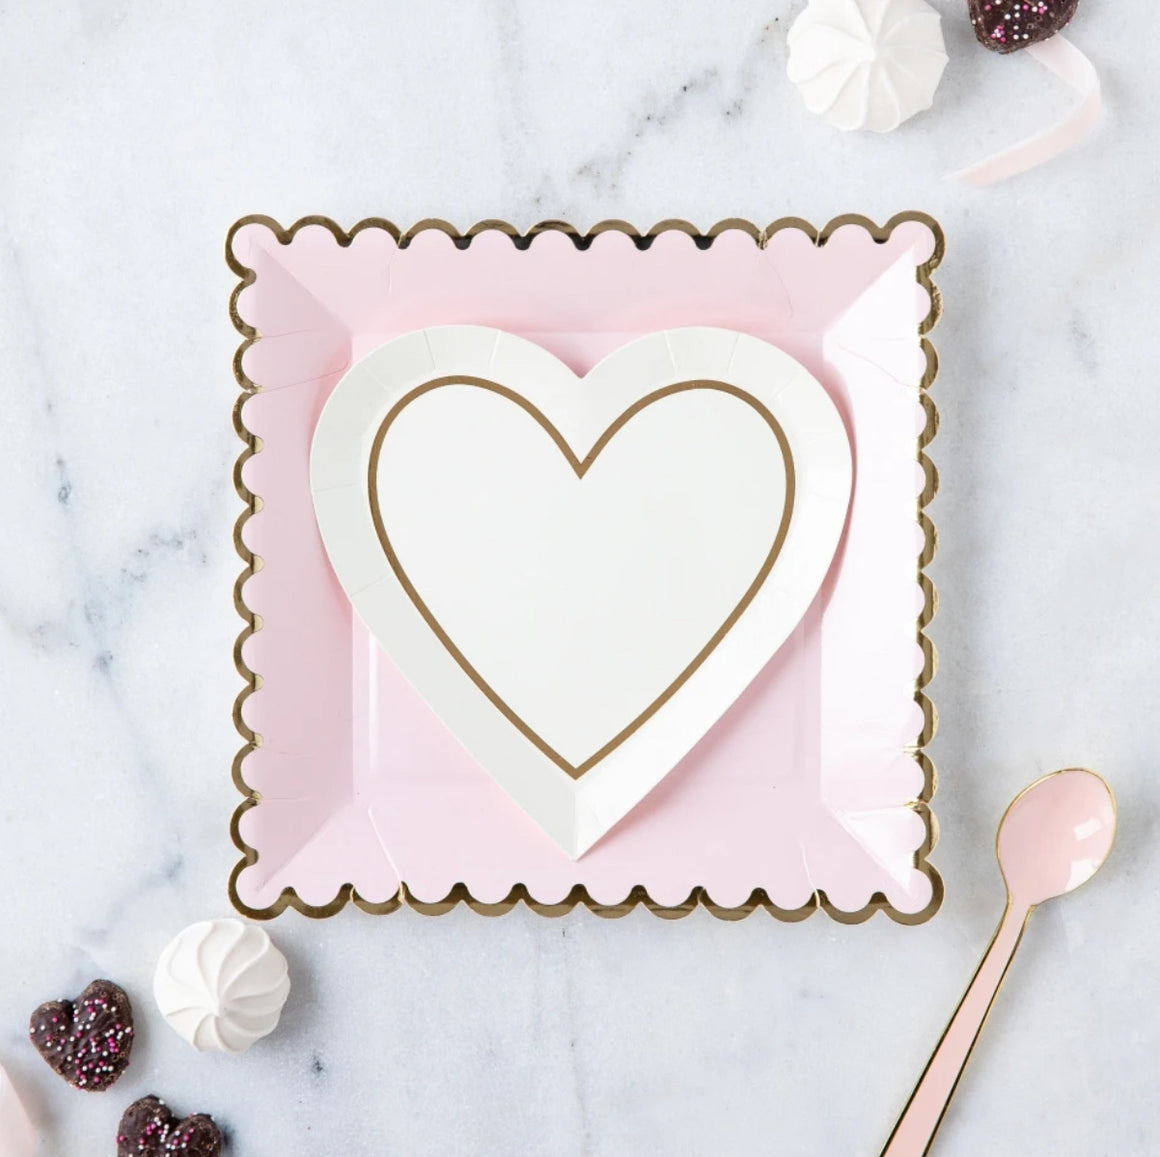 PLATES - SMALL HEART WHITE & GOLD